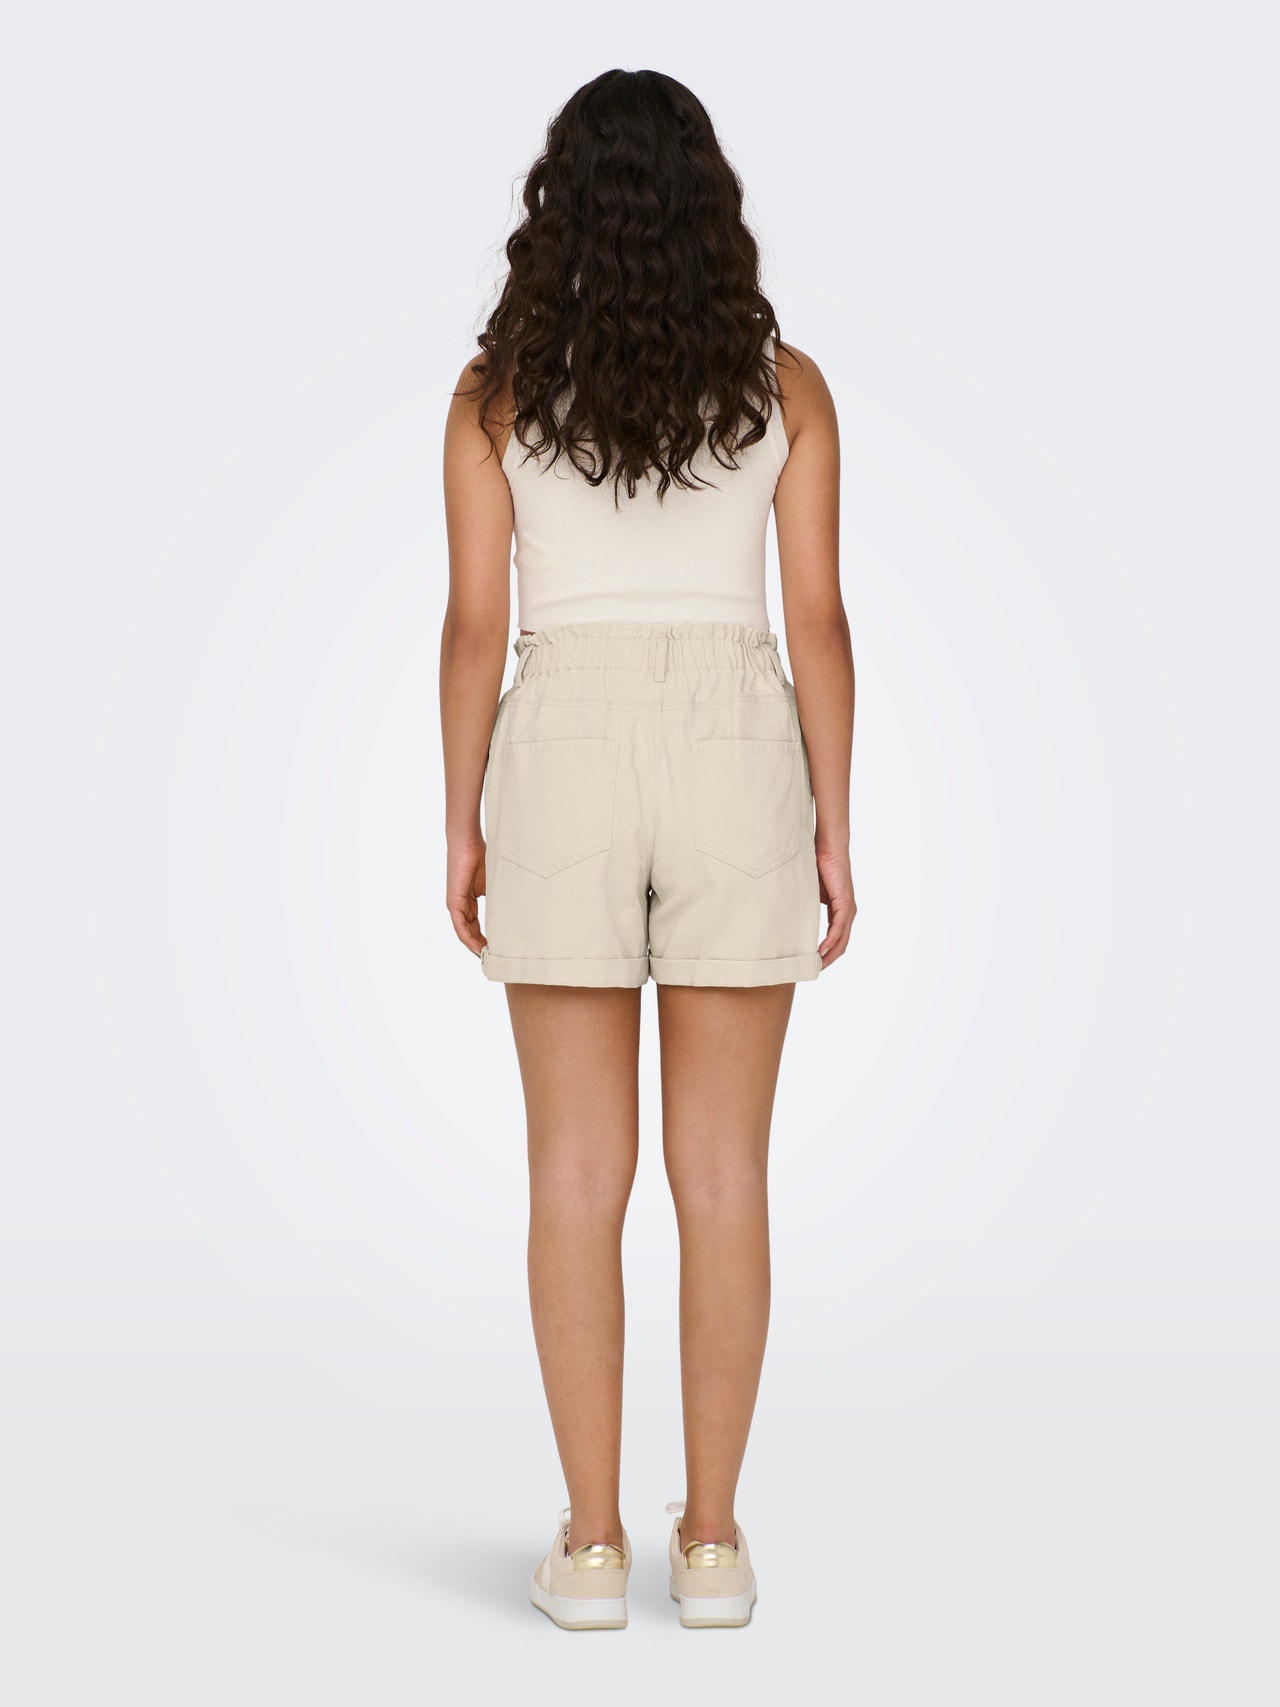 ONLY Loose Fit High waist Fold-up hems Shorts -Sandshell - 15257540